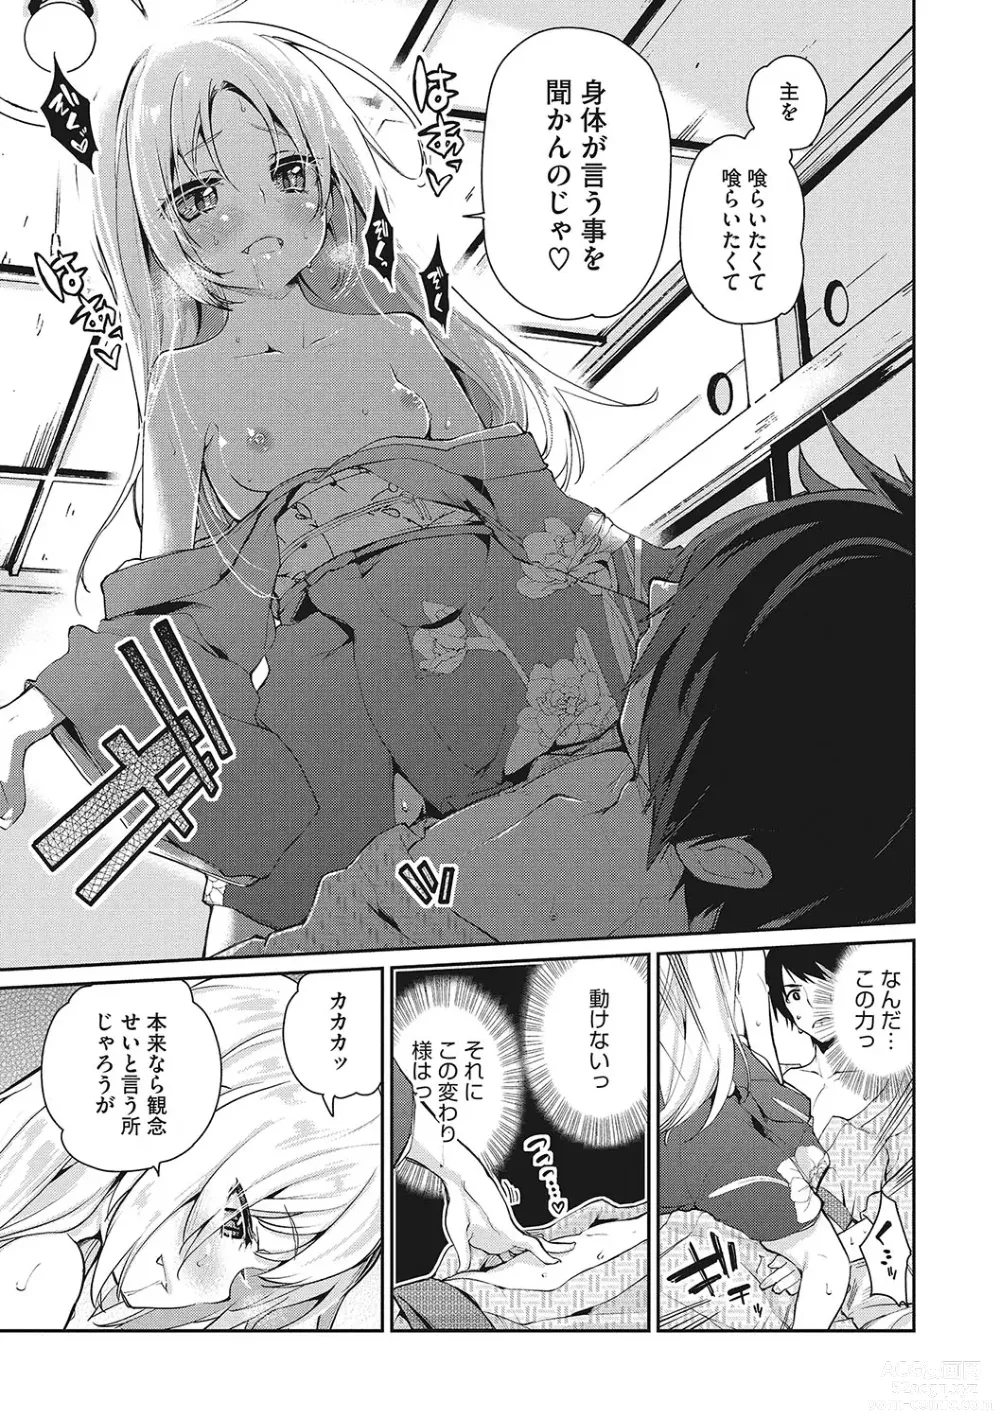 Page 16 of manga LQ -Little Queen- Vol. 54